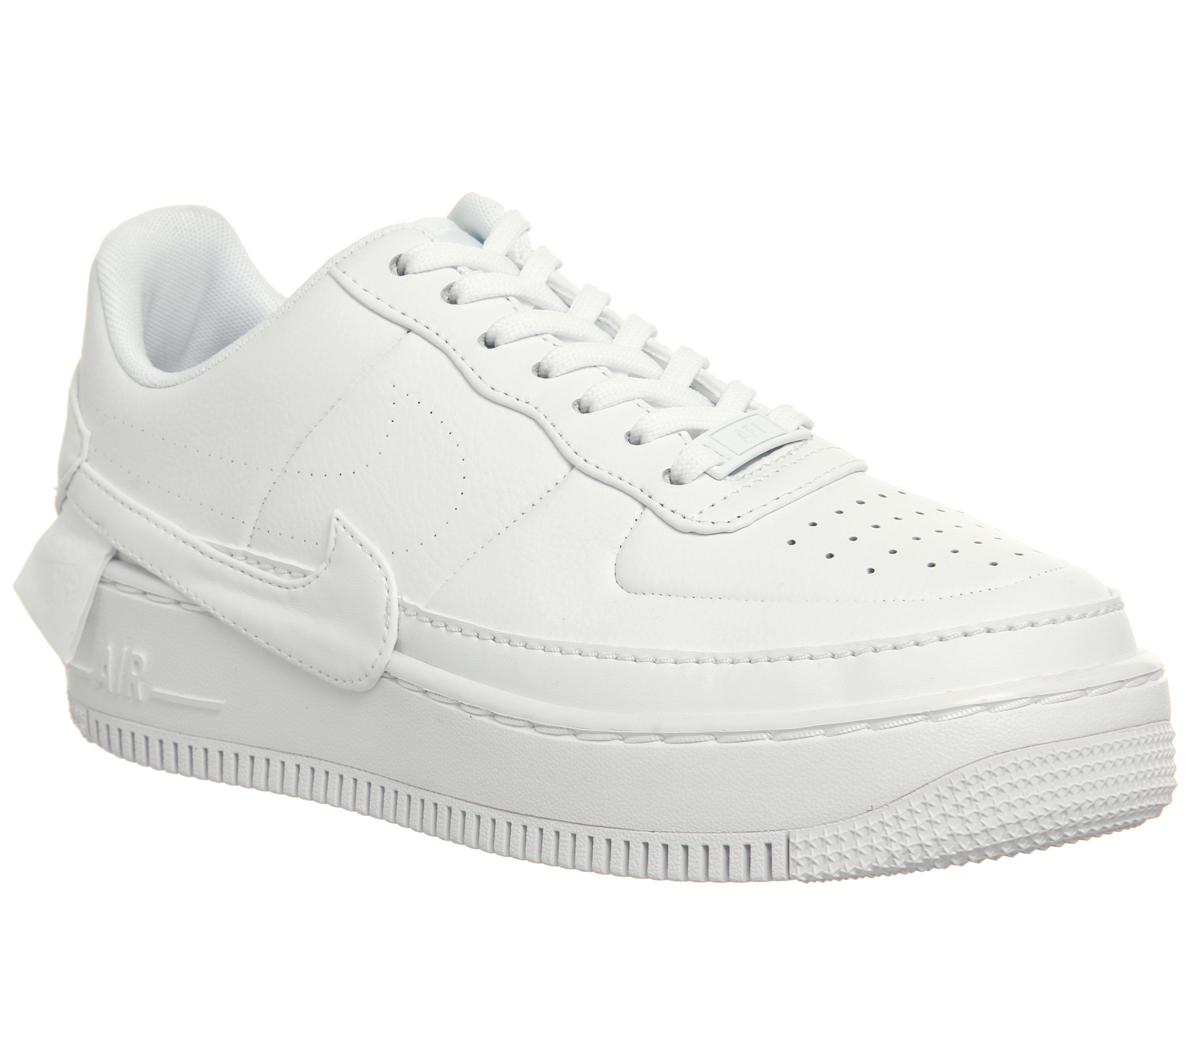 Nike AF1 Jester XX Trainers White - Hers trainers